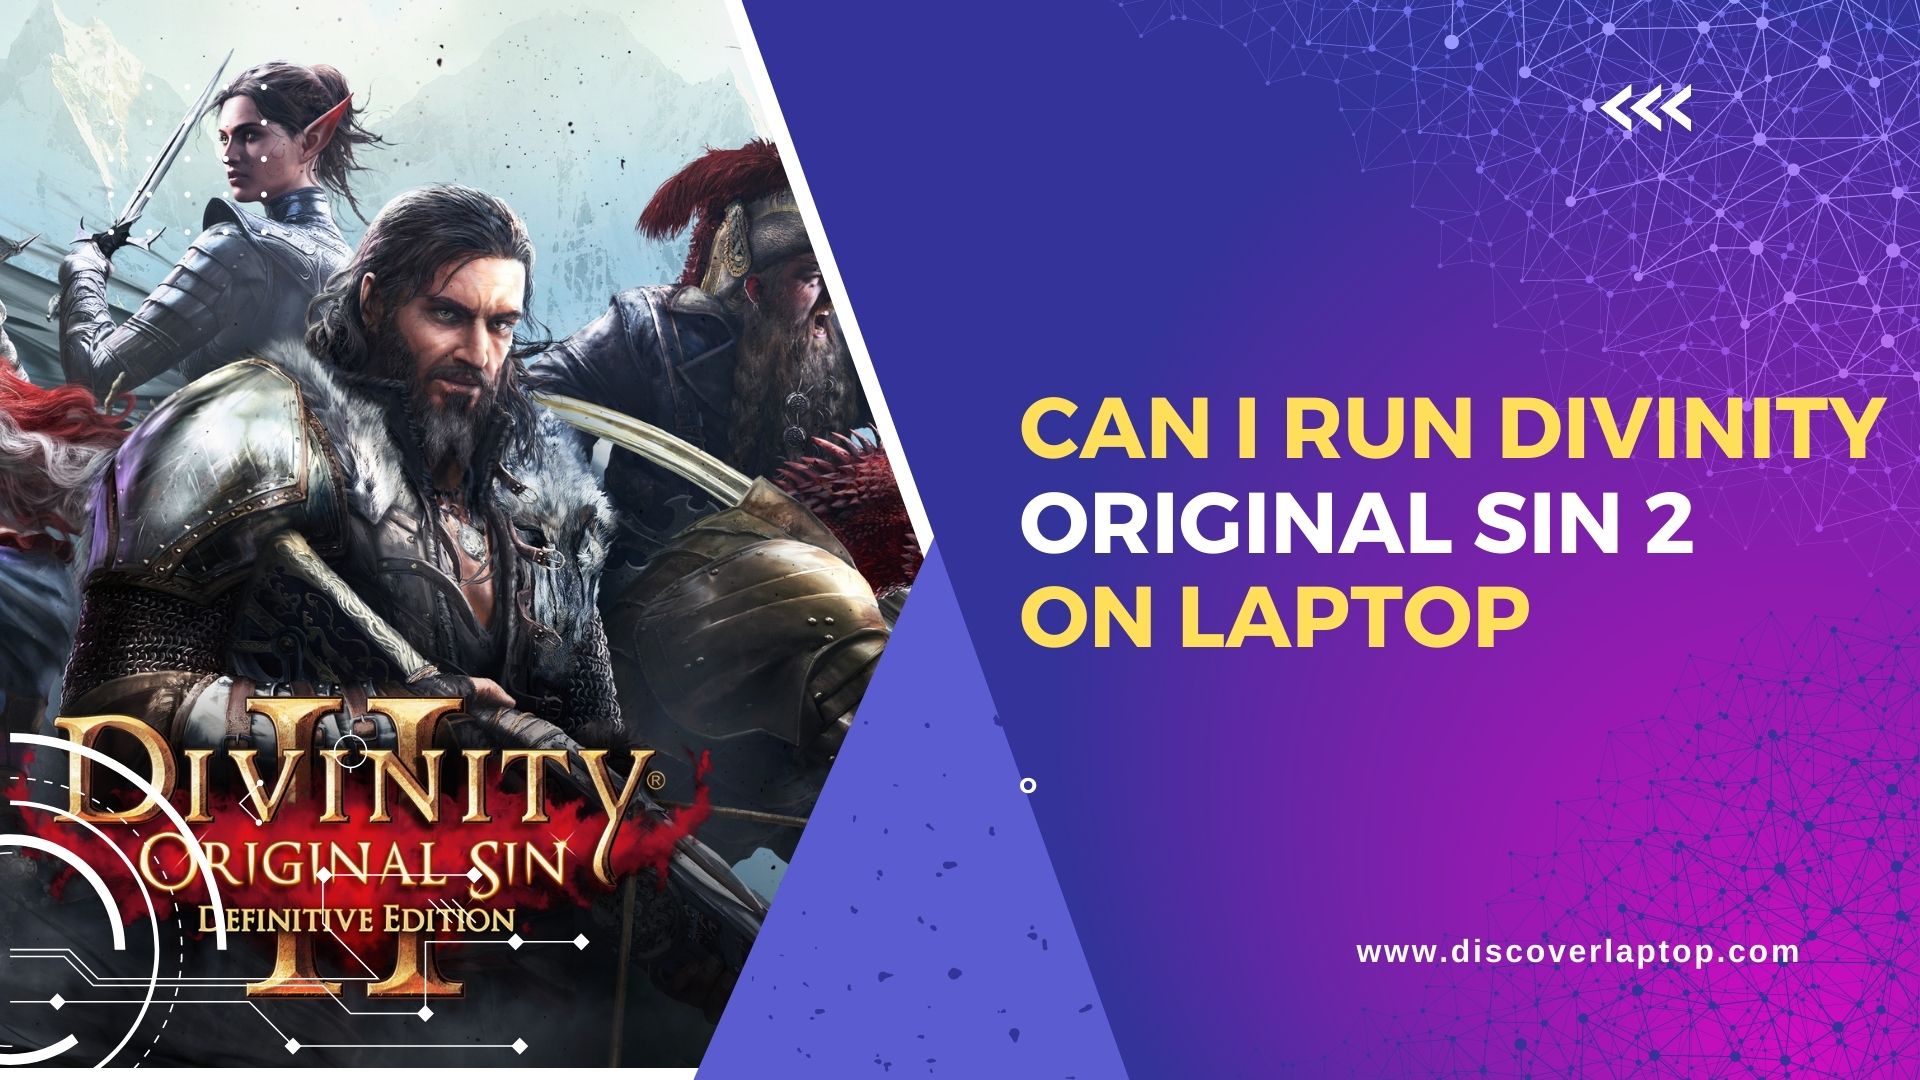 Can i run divinity original sin 2 on a laptop